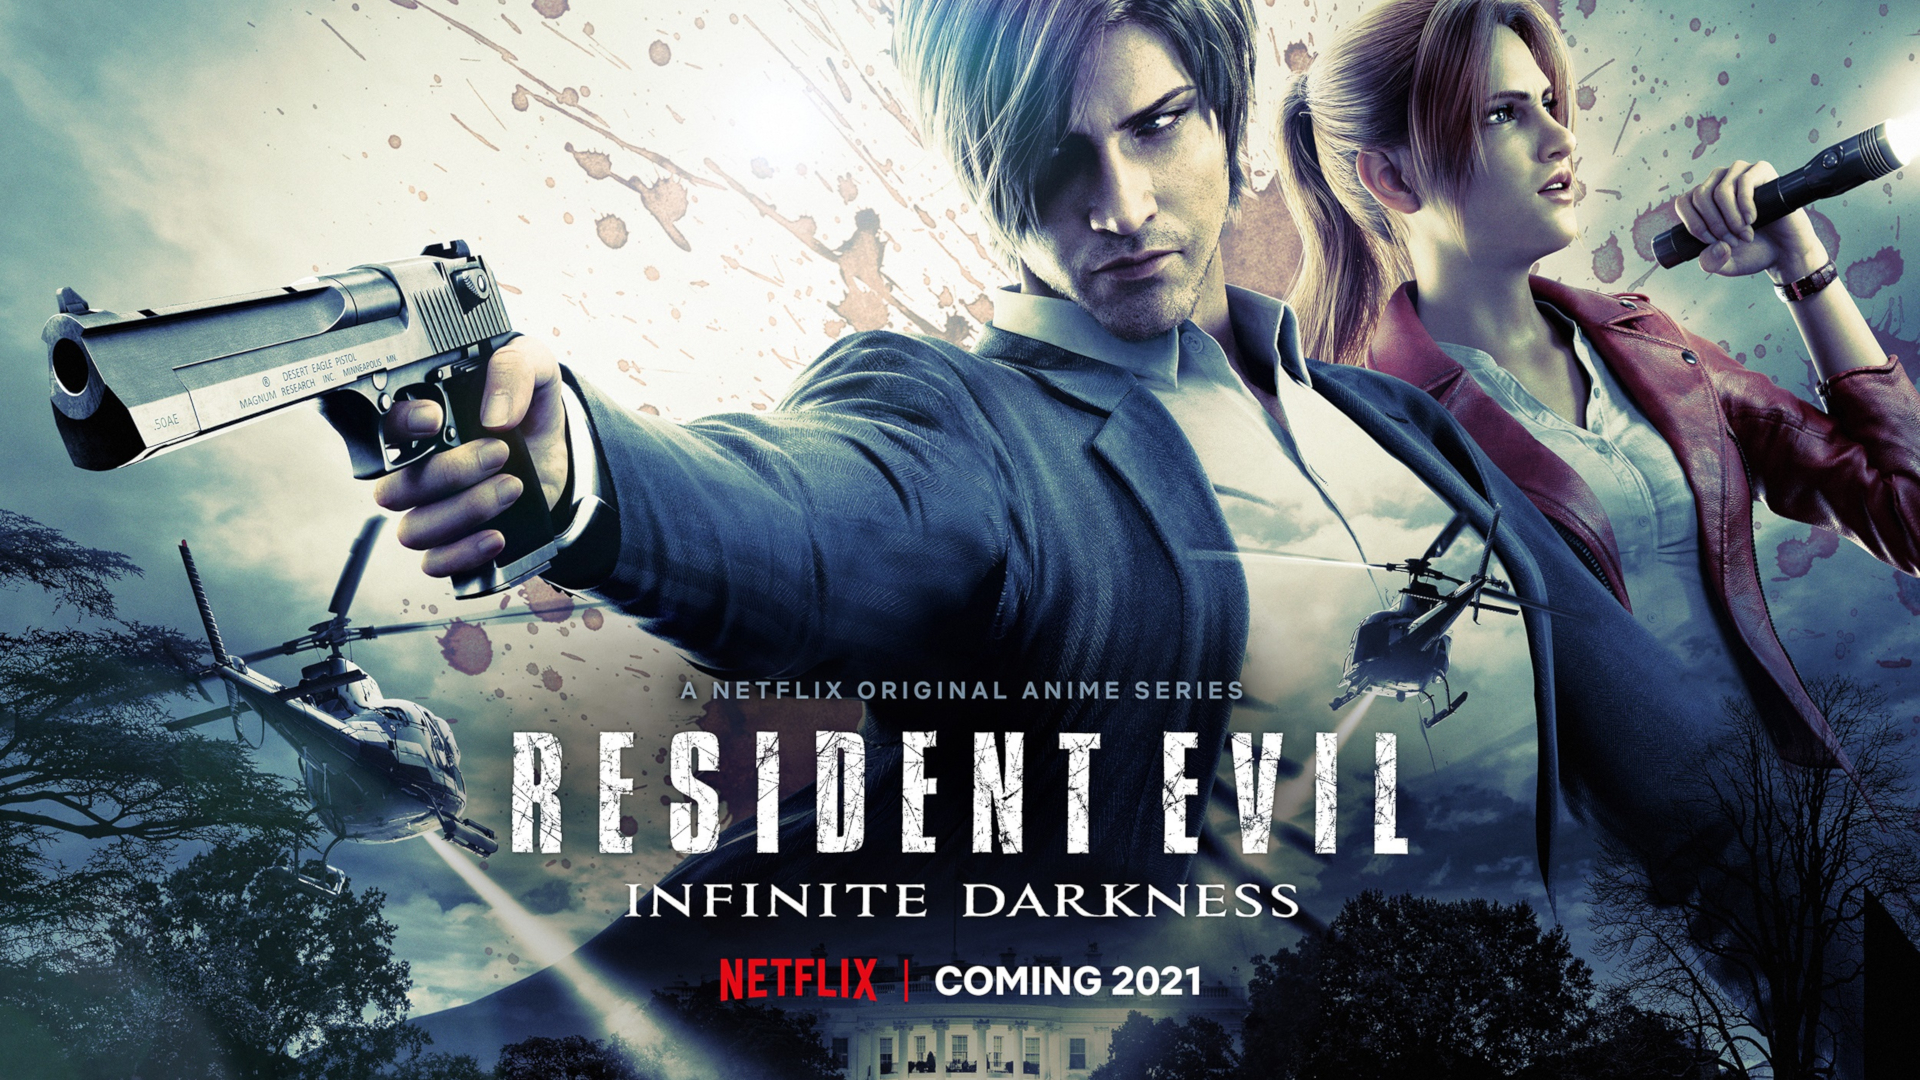 Buy Resident Evil: The Animated Collection - Microsoft Store